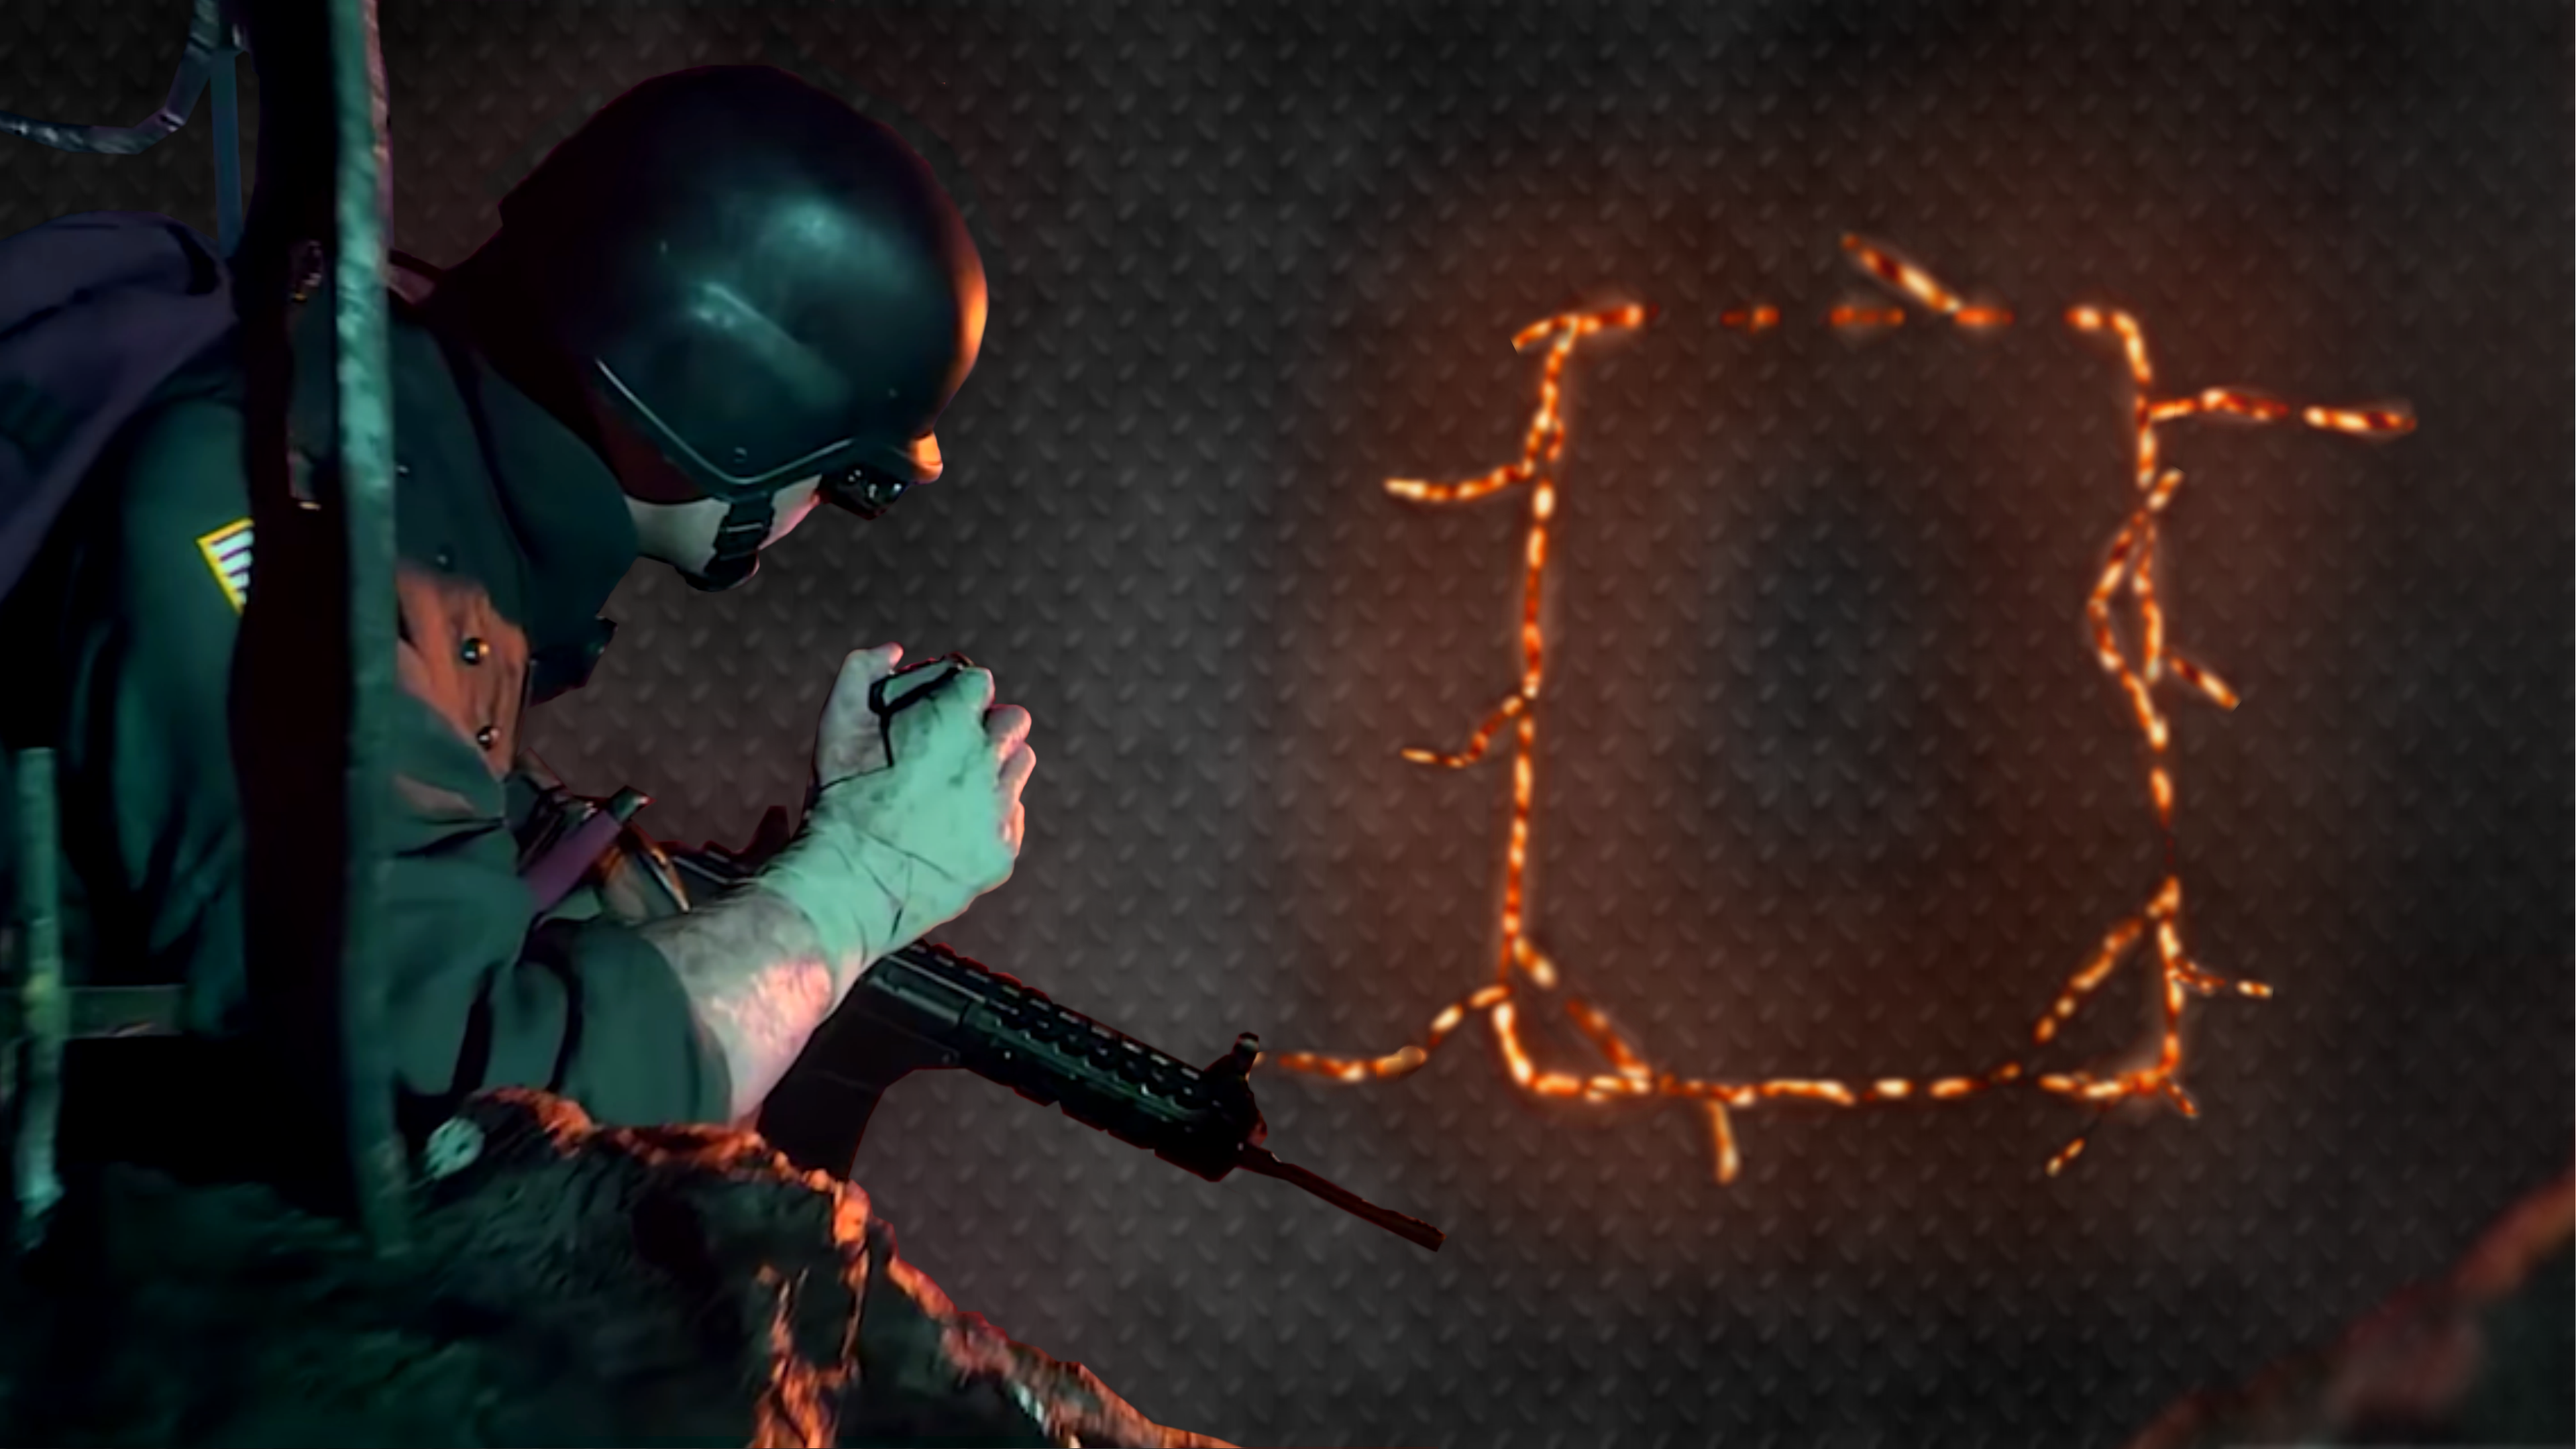 Made this thermite background, what do you guys think?